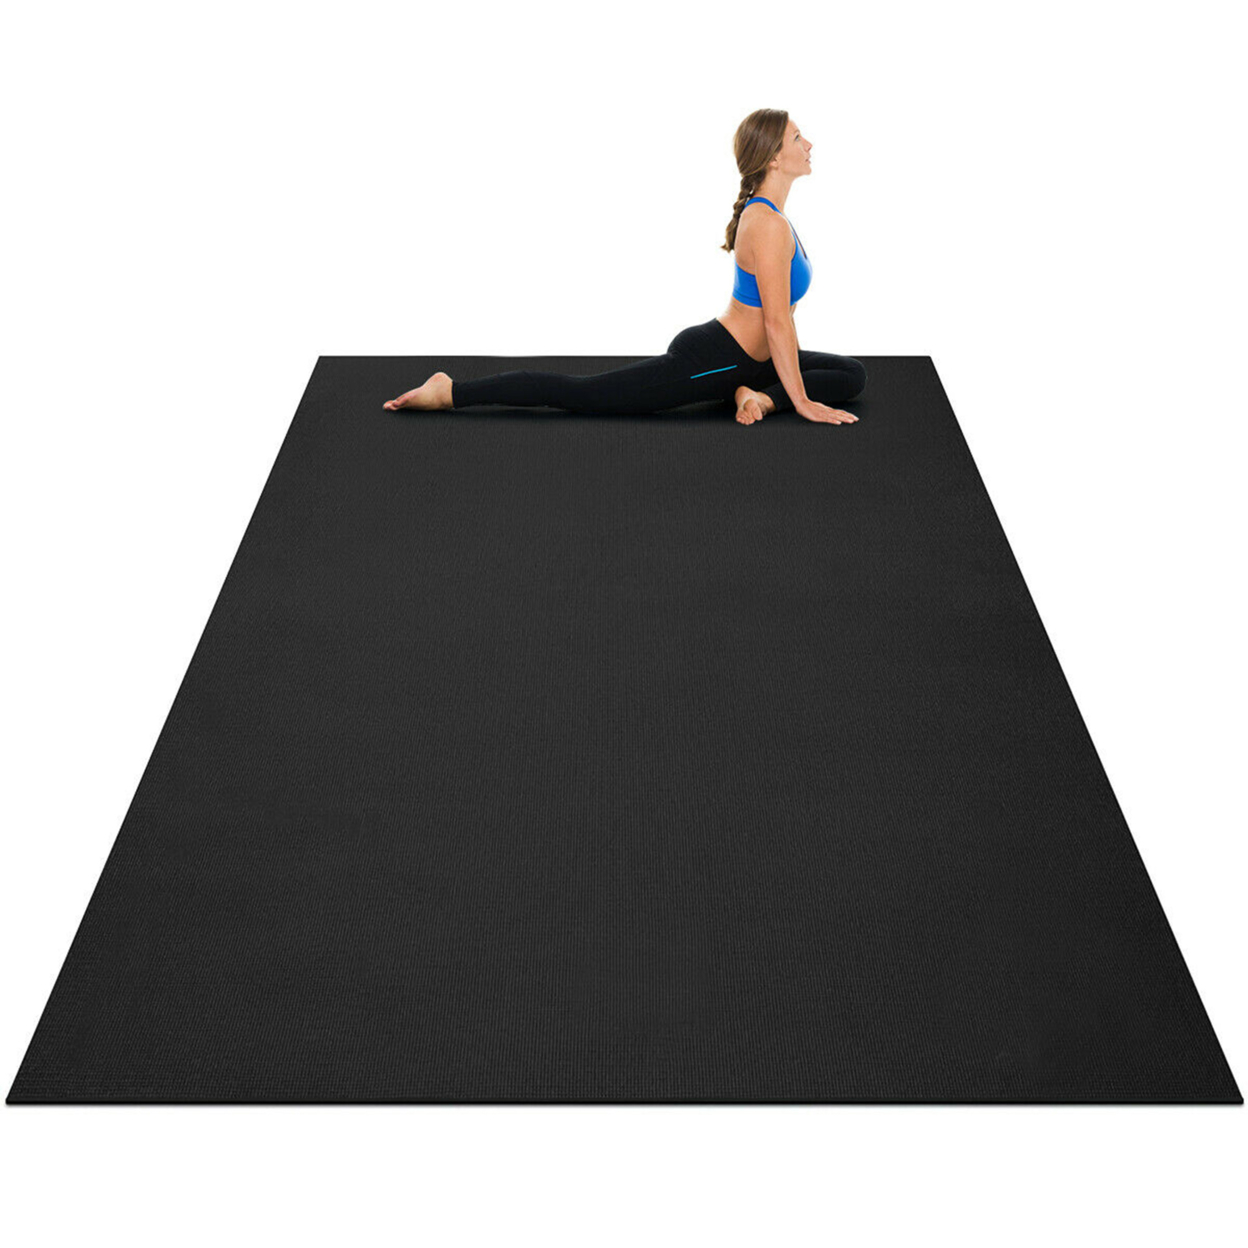 Large Yoga Mat 7' X 5' X 8 Mm Thick Workout Mats For Home Gym Flooring - Black